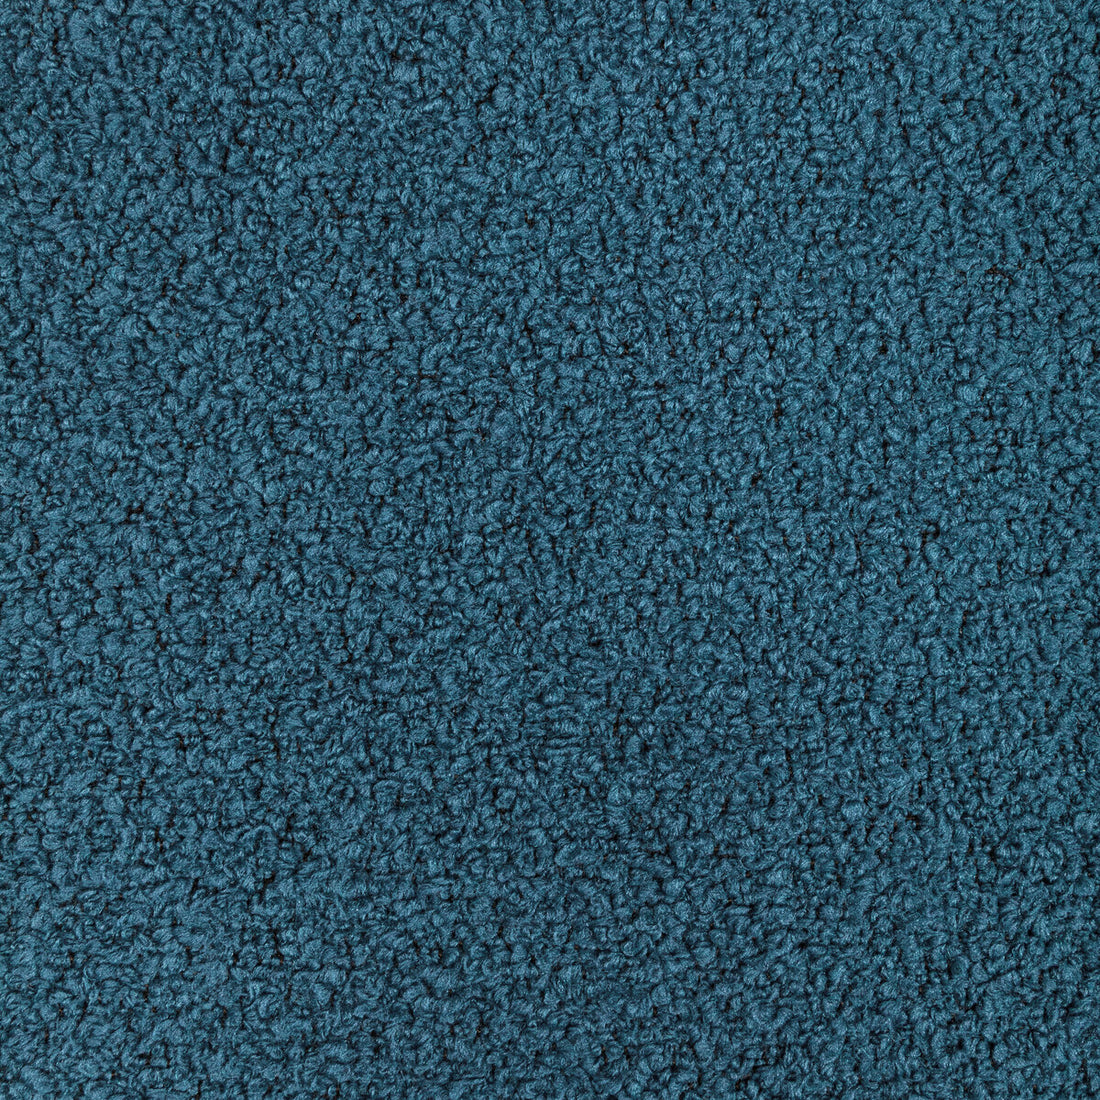 Namaste Boucle fabric in dress blue color - pattern 36388.5.0 - by Kravet Design in the Crypton Home - Celliant collection